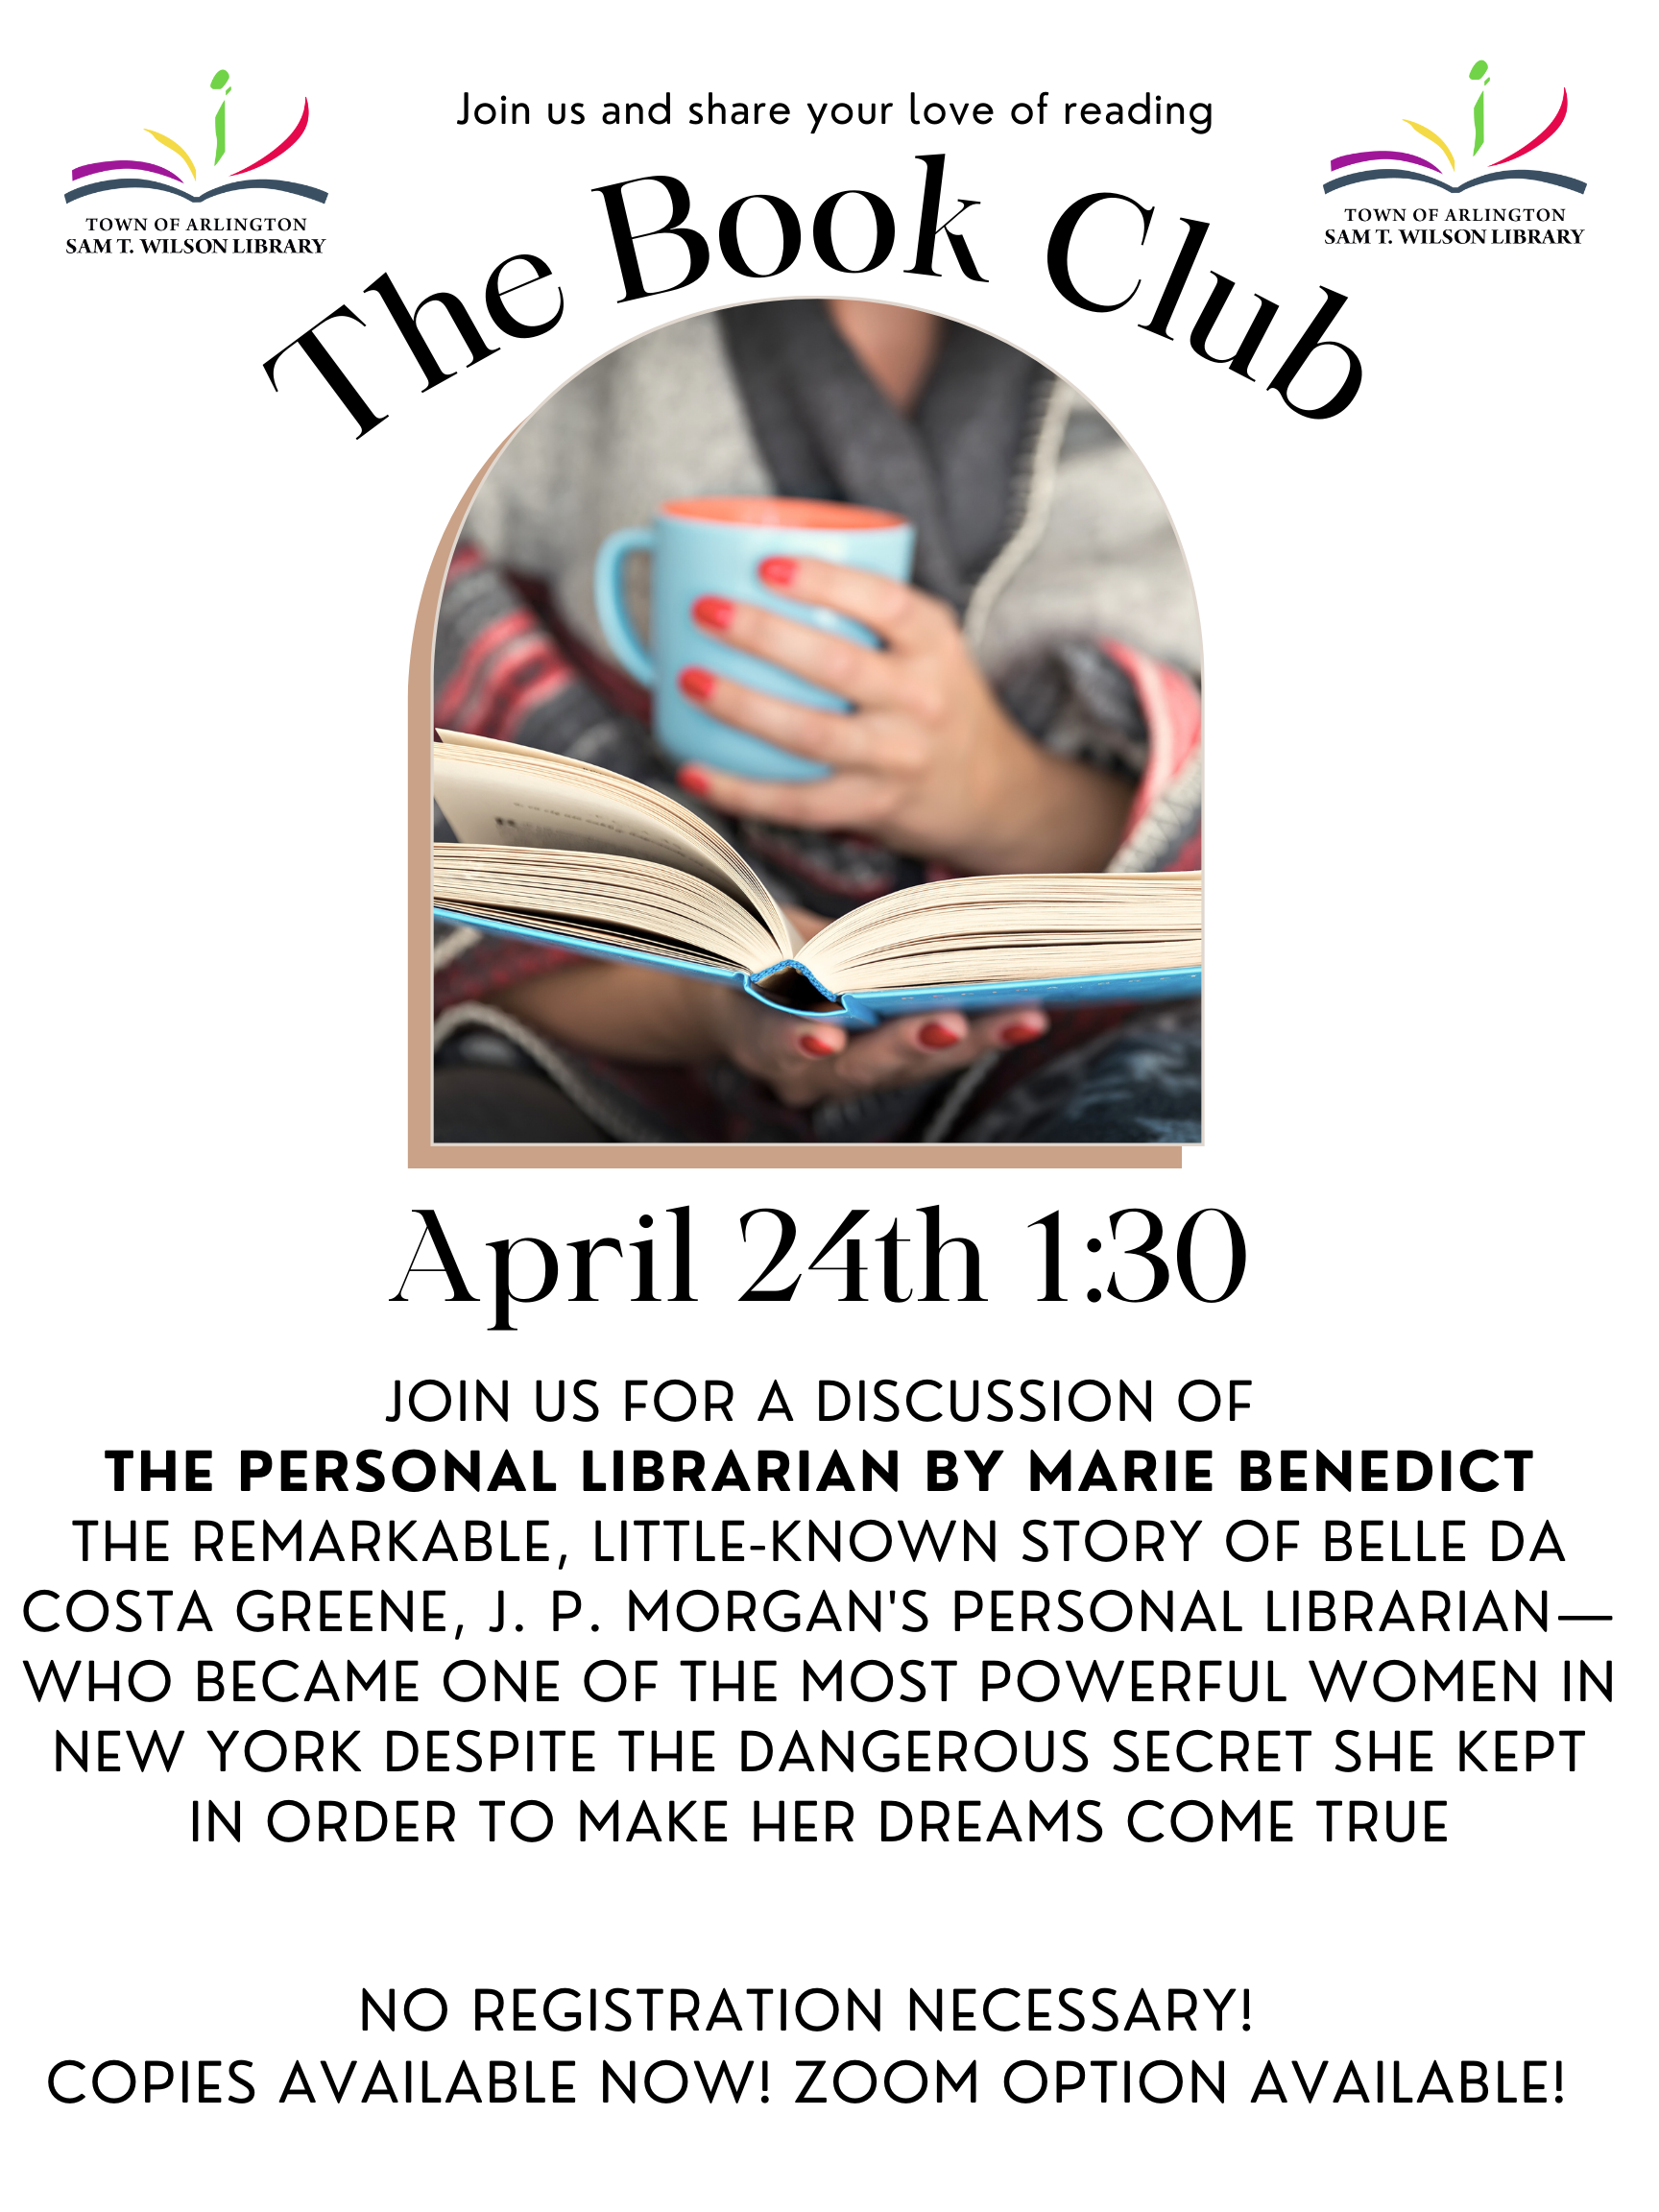 The Book Club, April 24th at 1:30 for discussion of The Personal Librarian by Marie Benedict